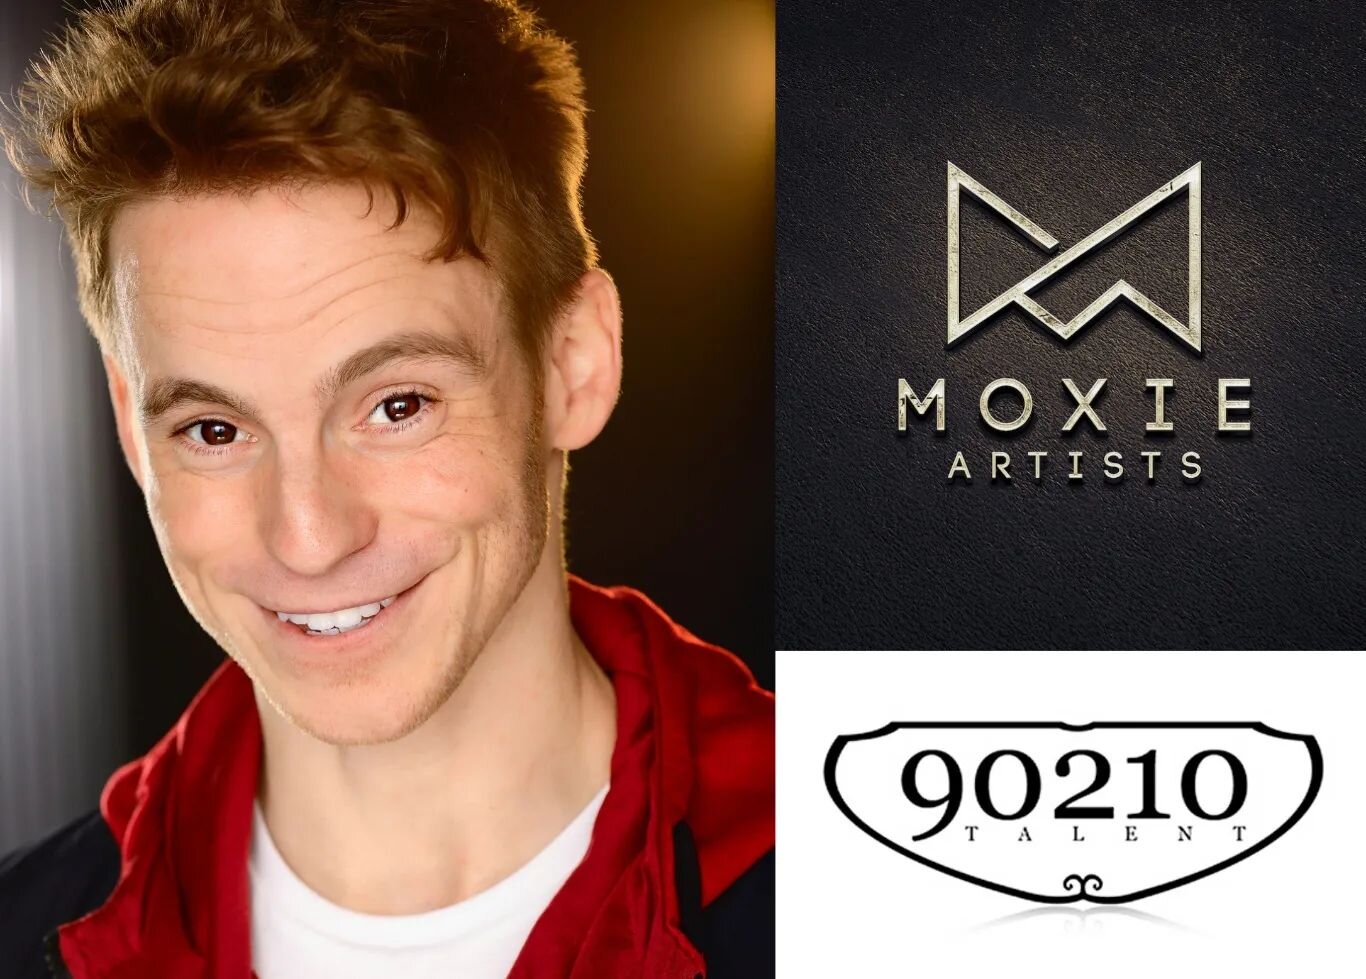 JUST SIGNED!
Super excited to announce that I have signed with @moxieartists for management and @90210Talent for Theatrical Representation.
(And not gonna lie... 😅 I'm pretty pumped) #actor #agentgoals #letsgettowork